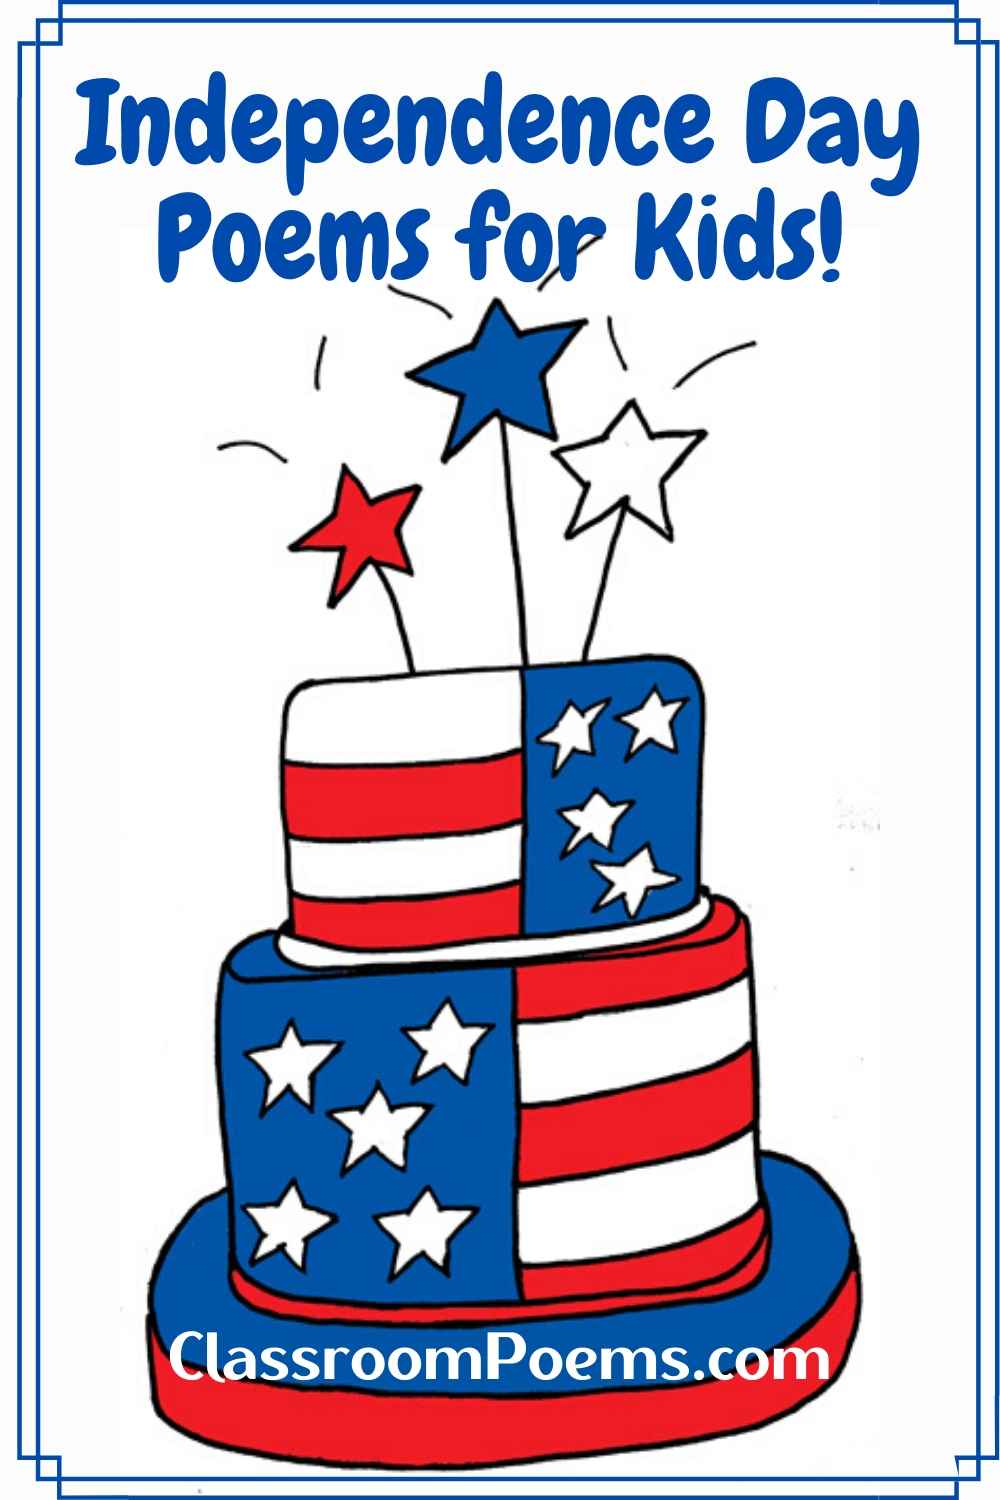 Independence Day poems and 4th of July poems for kids. 